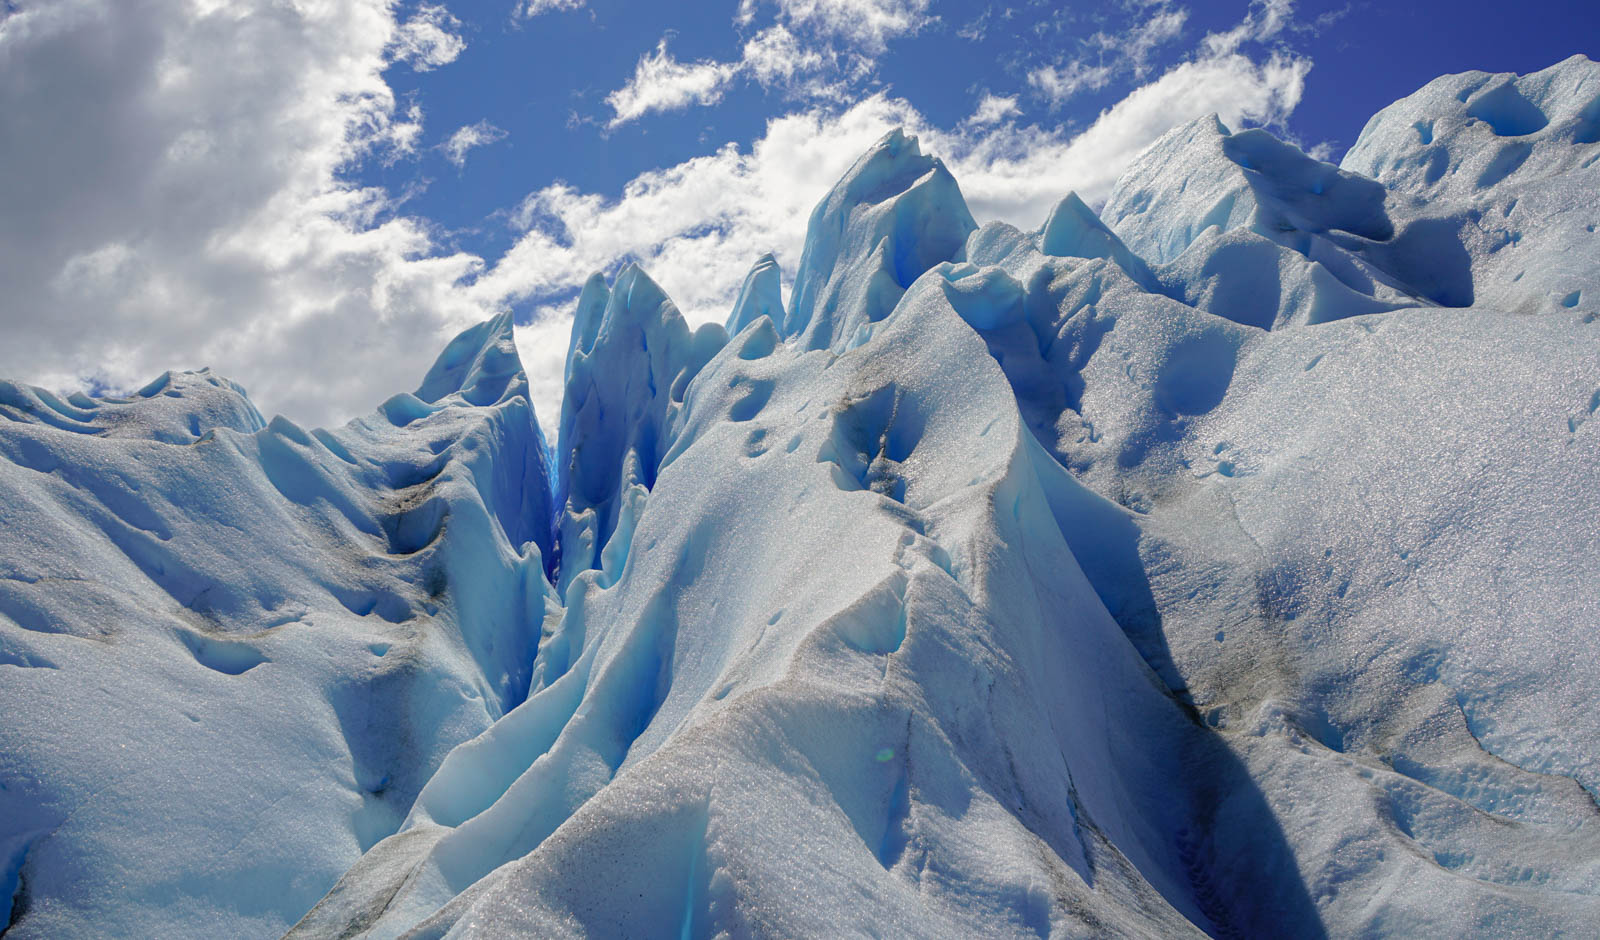 Glacier mountains created by melting and runoff